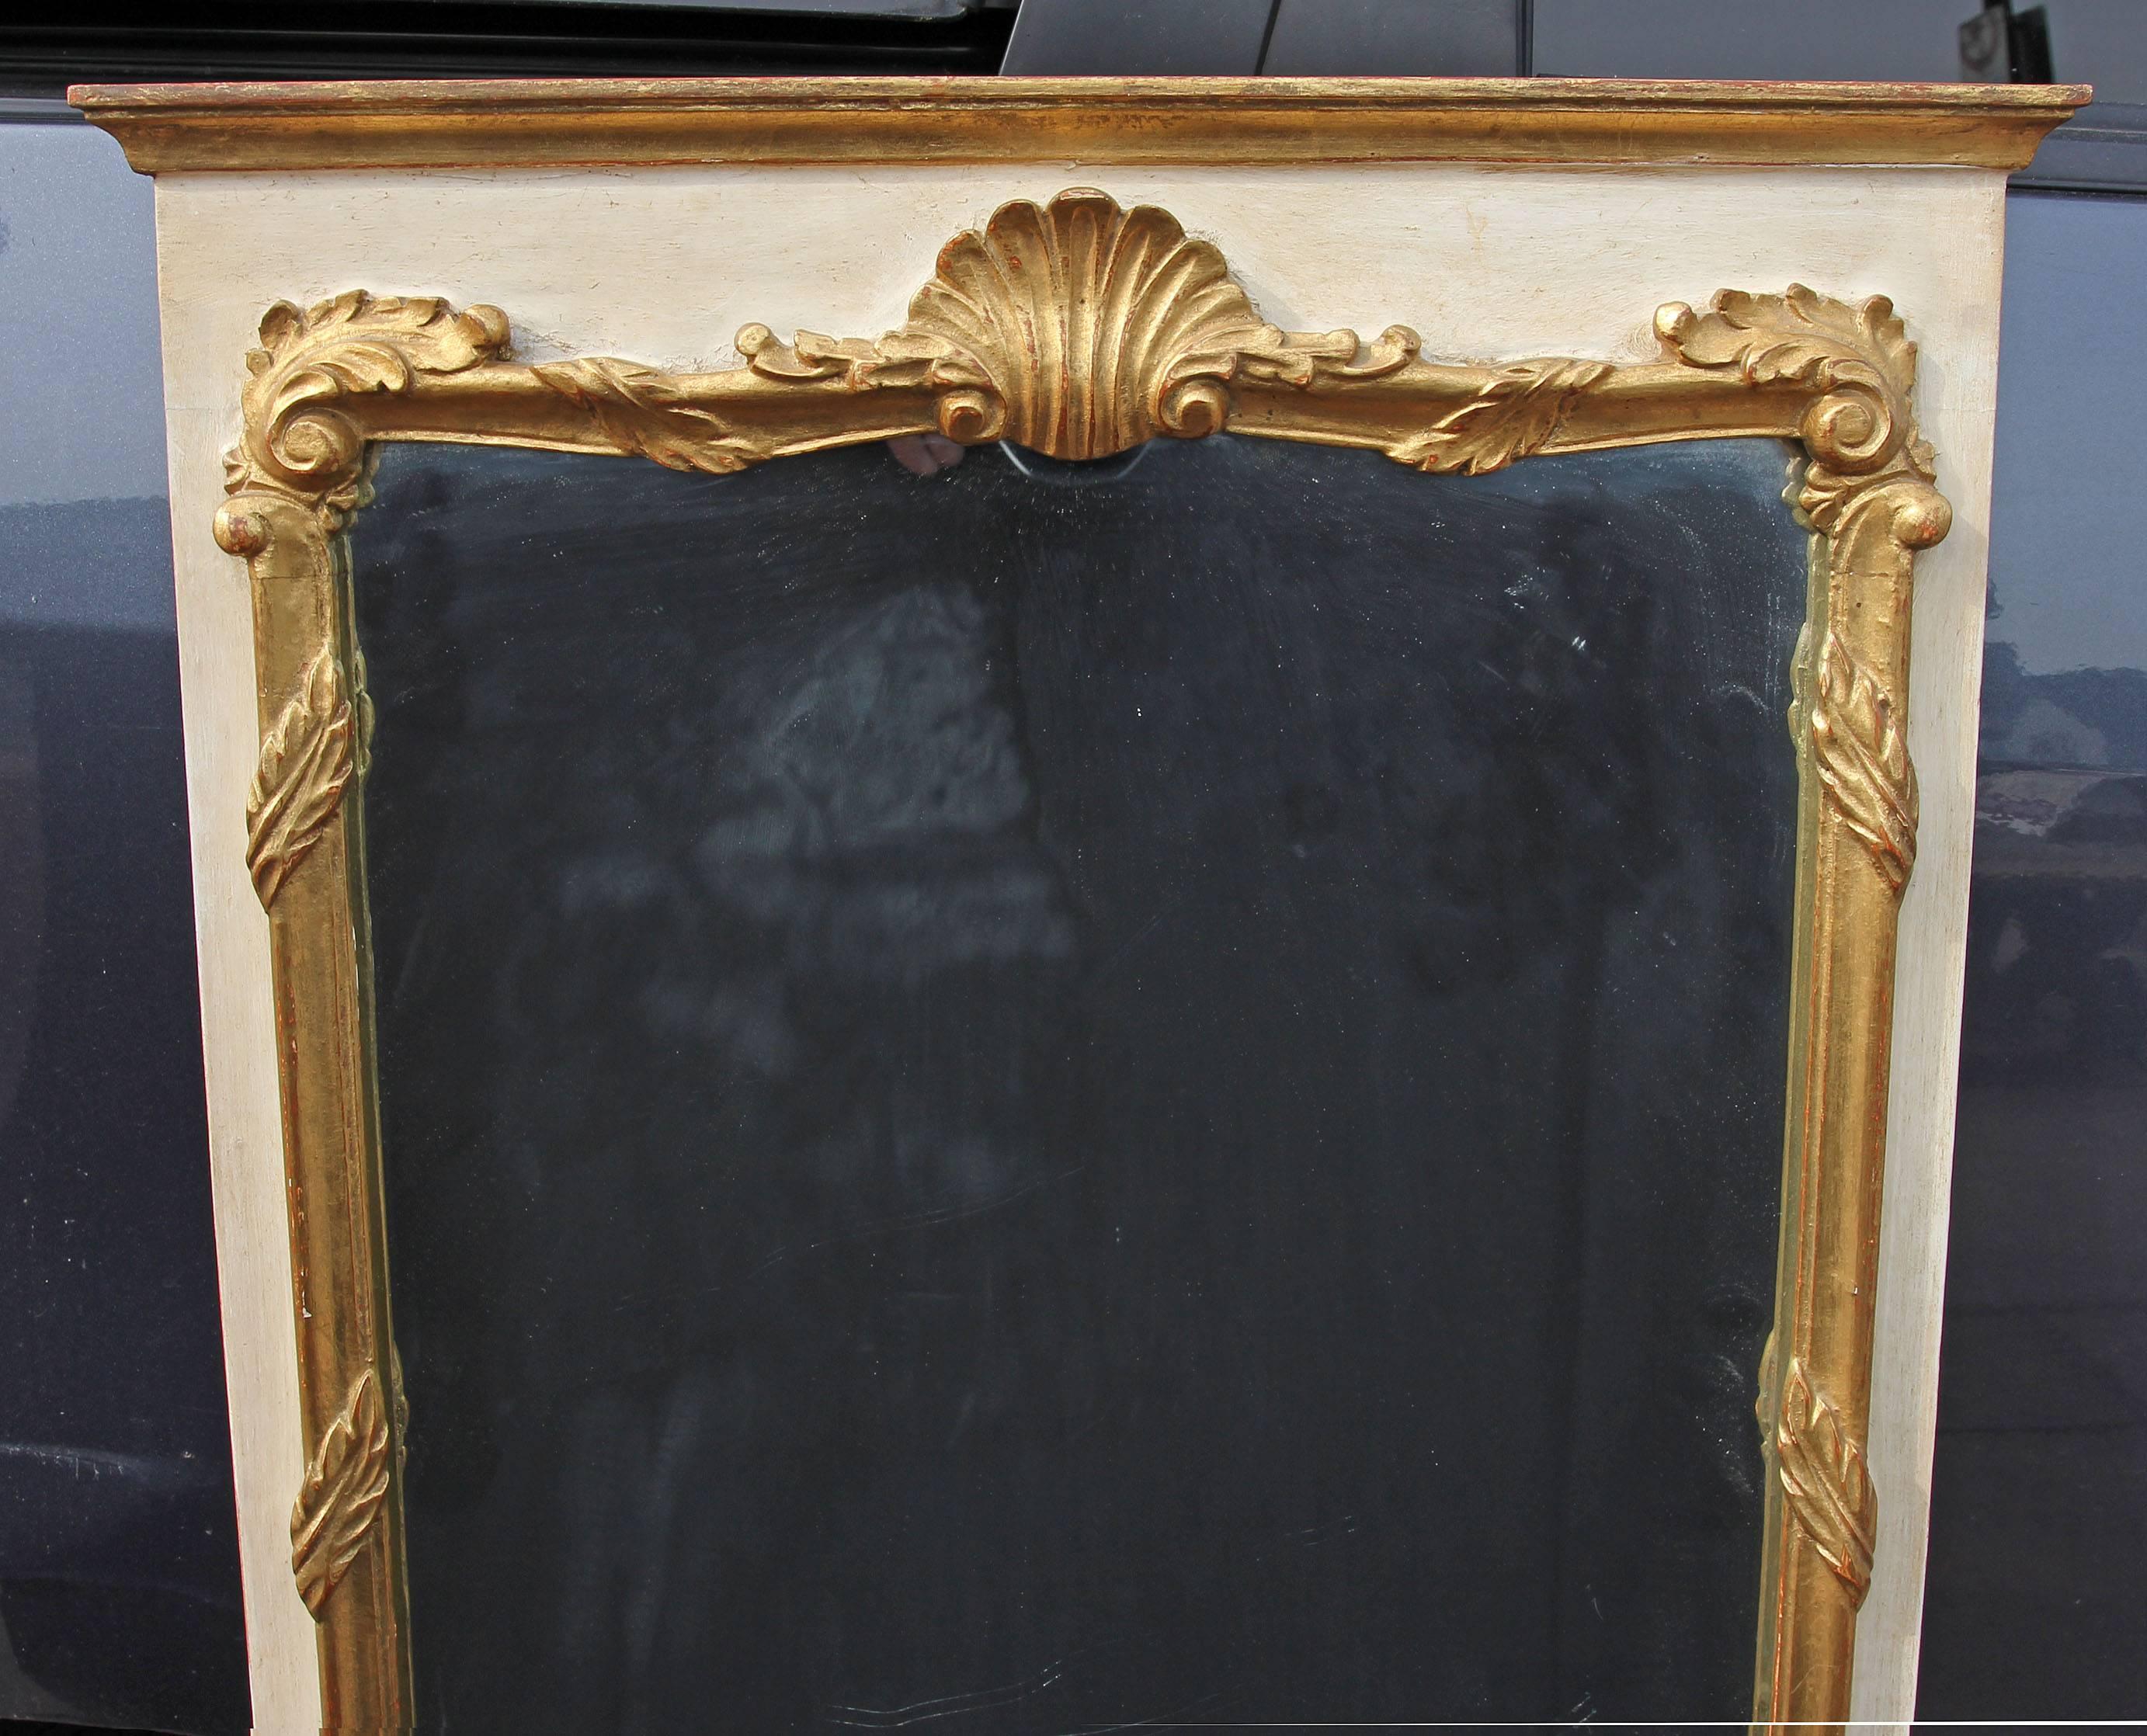 Italian midcentury carved, painted, and gilt mirror. Hard to find narrow size 46.5